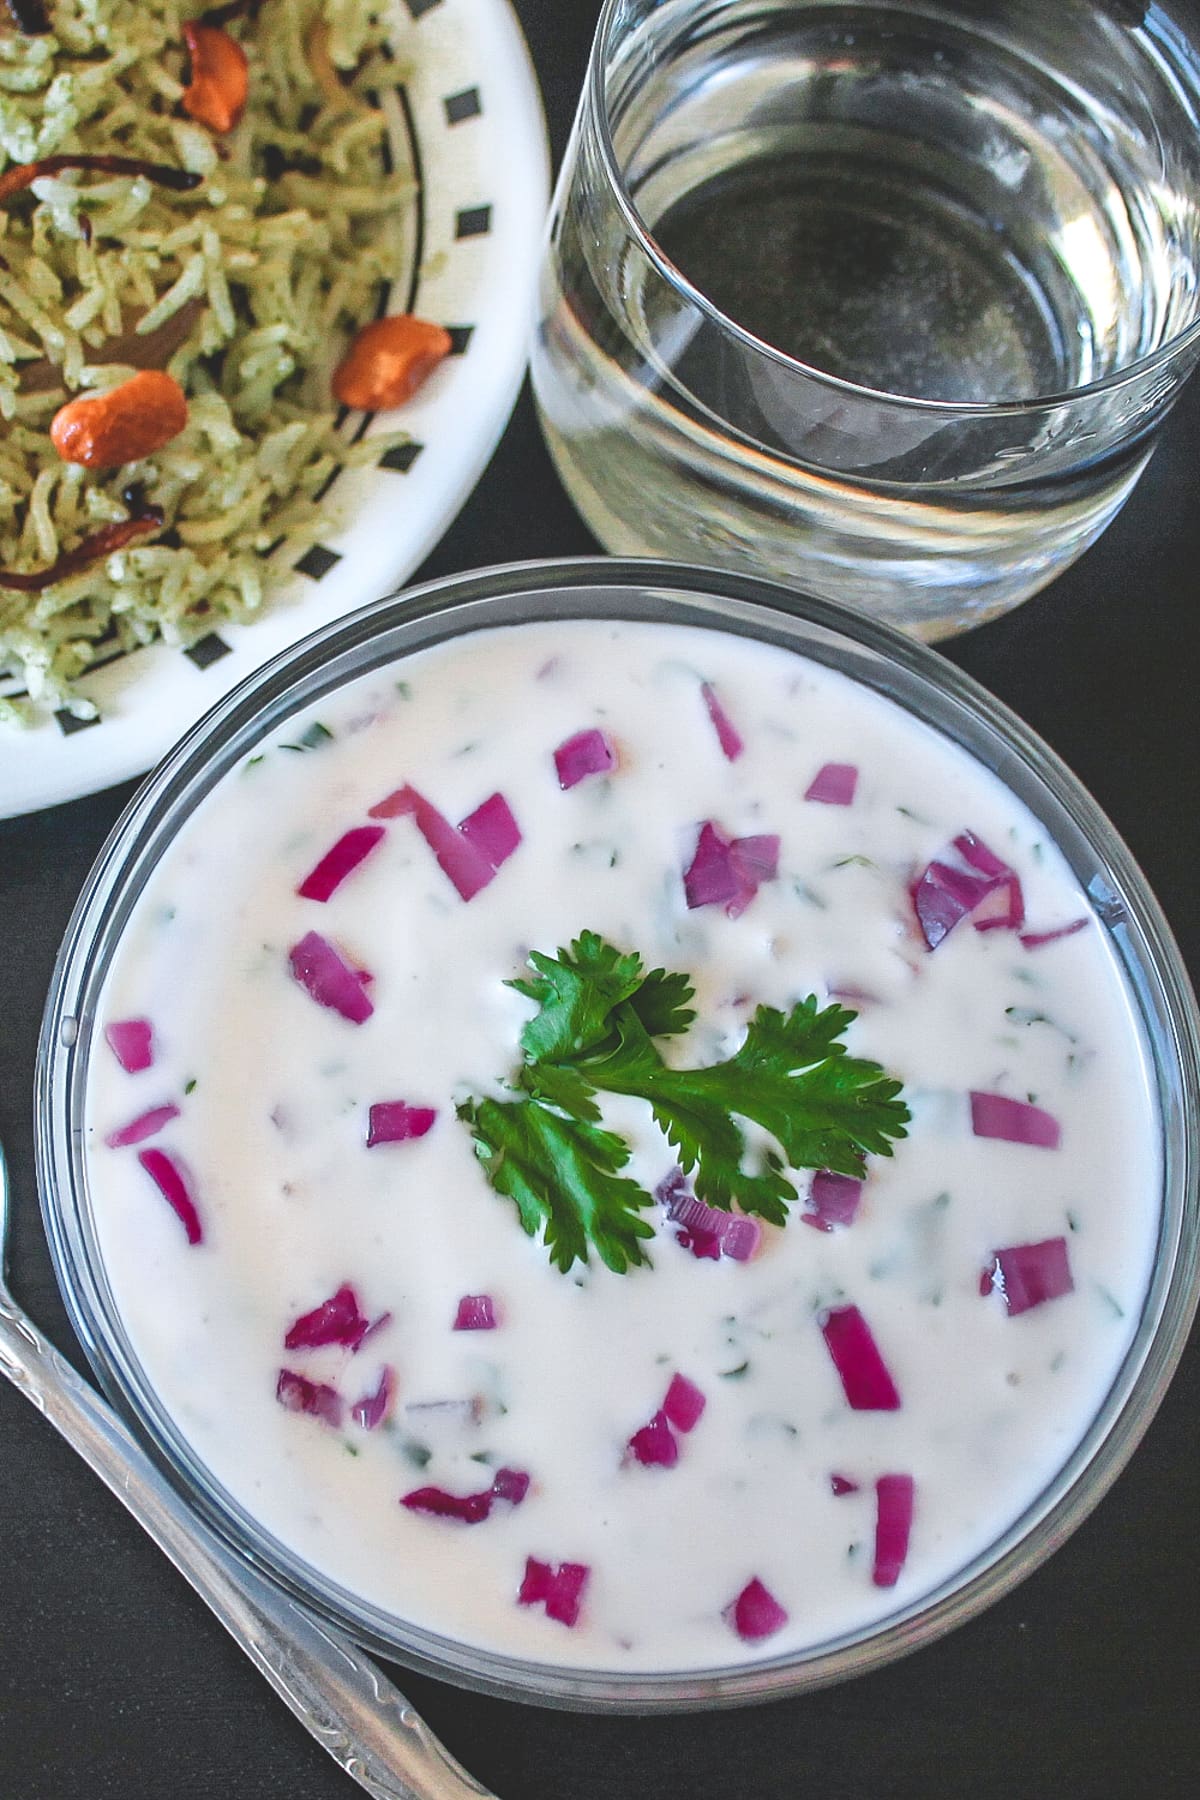 Onion raita garnished with cilantro and served with mint rice and a glass of water.